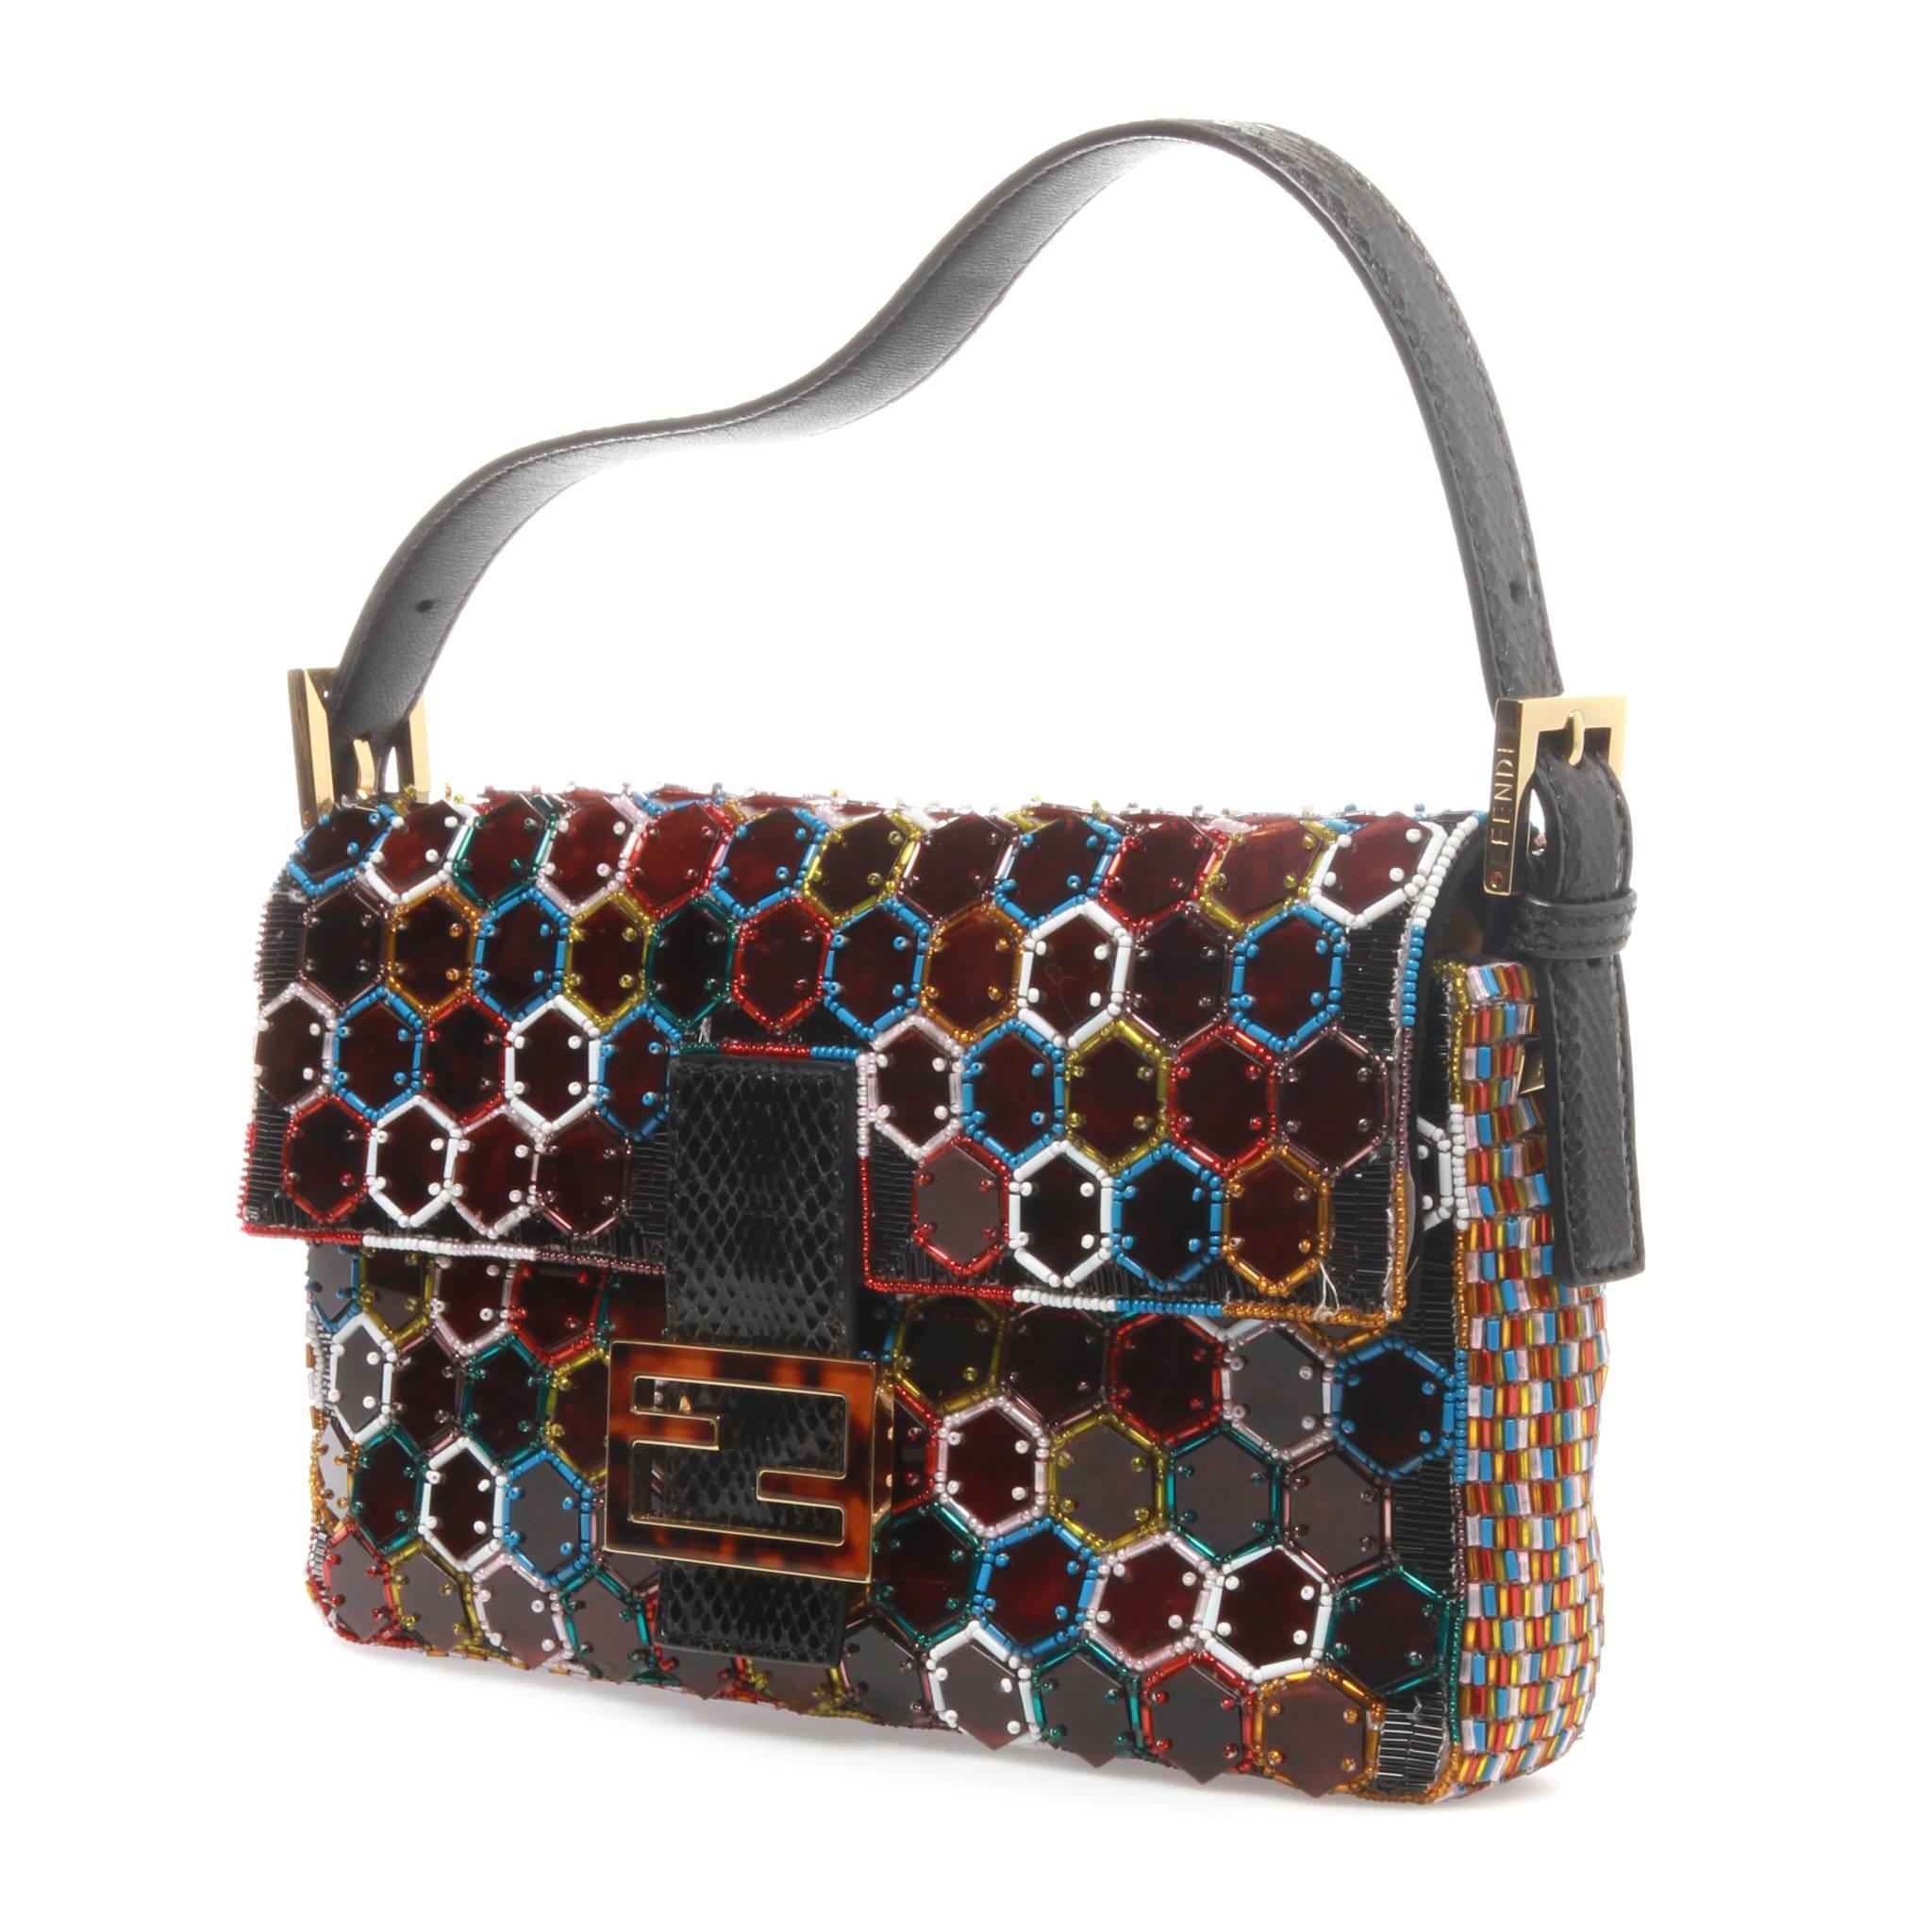 Fendi Resort 2015 Baguette Bag featuring a multicoloured beading and plexiglass hexagon motif. The bag is accented with black python leather and gold detailing and a tortoiseshell logo plate. 

The inside is lined with lime green fabric and comes